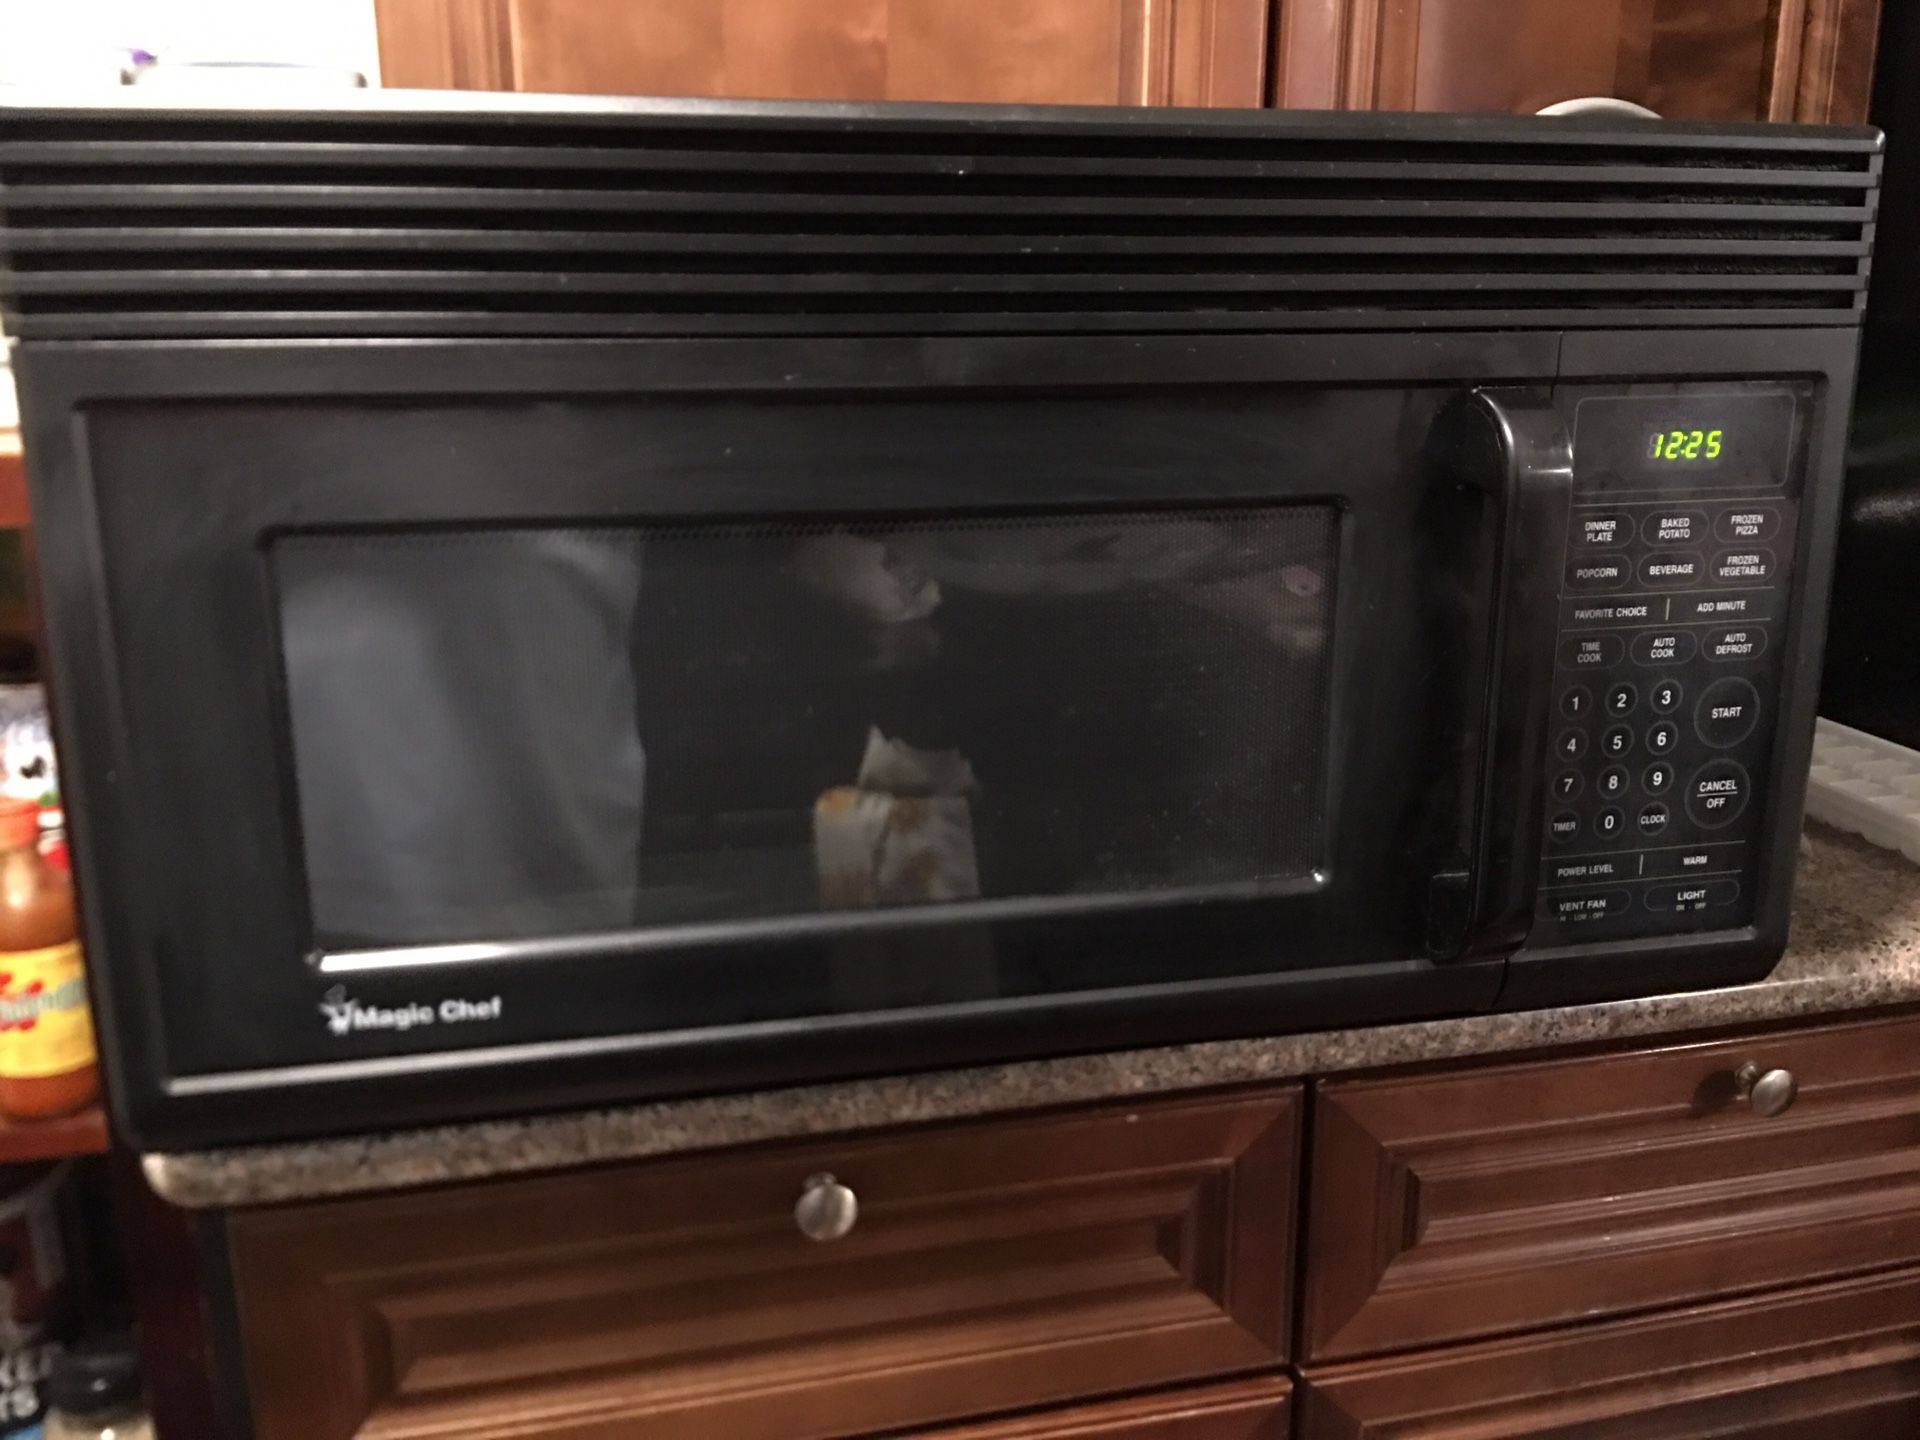 Magic Chef 1.6 cu. ft. Over the range microwave in black